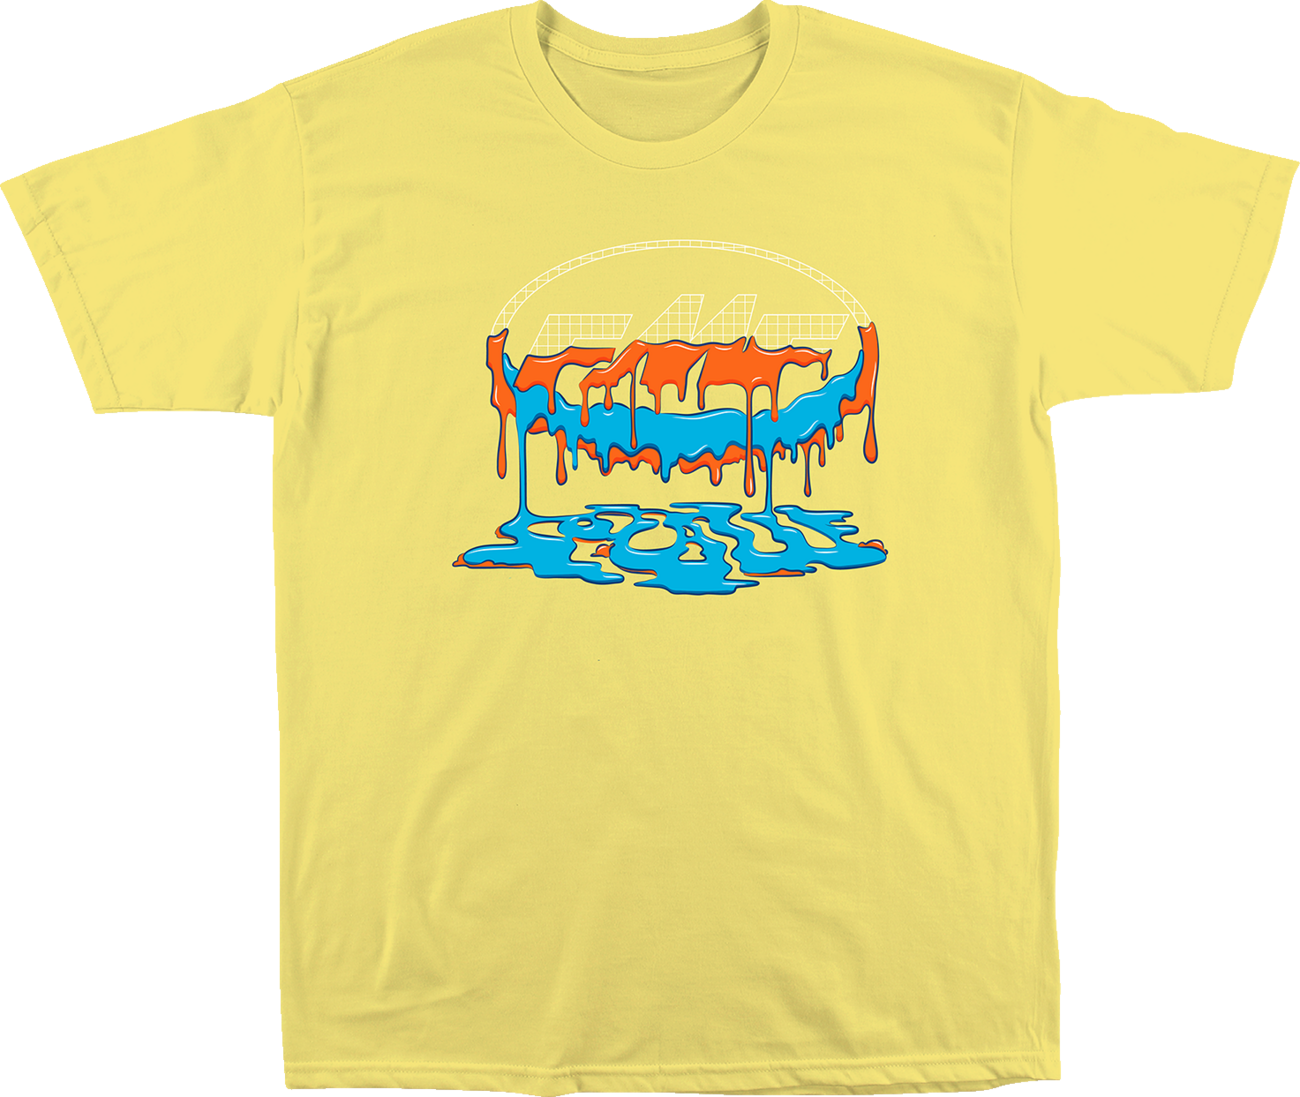 FMF Ooze T-Shirt - Yellow - Large SP22118902YLLG 3030-21858